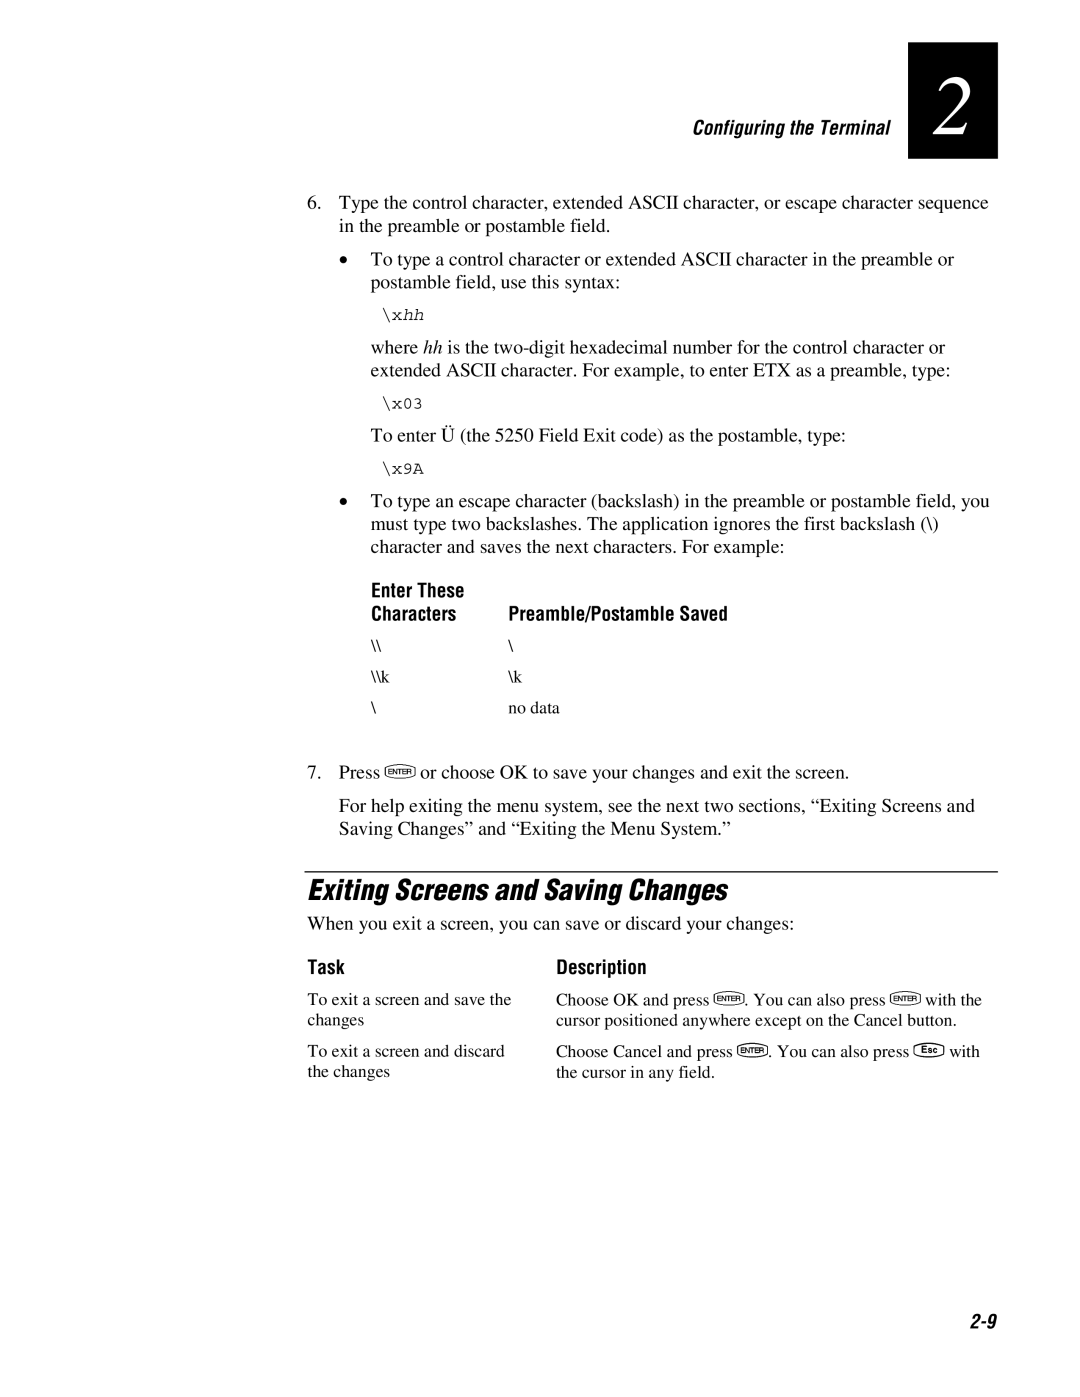 IBM 243X user manual Exiting Screens and Saving Changes, Characters, Task, Description 